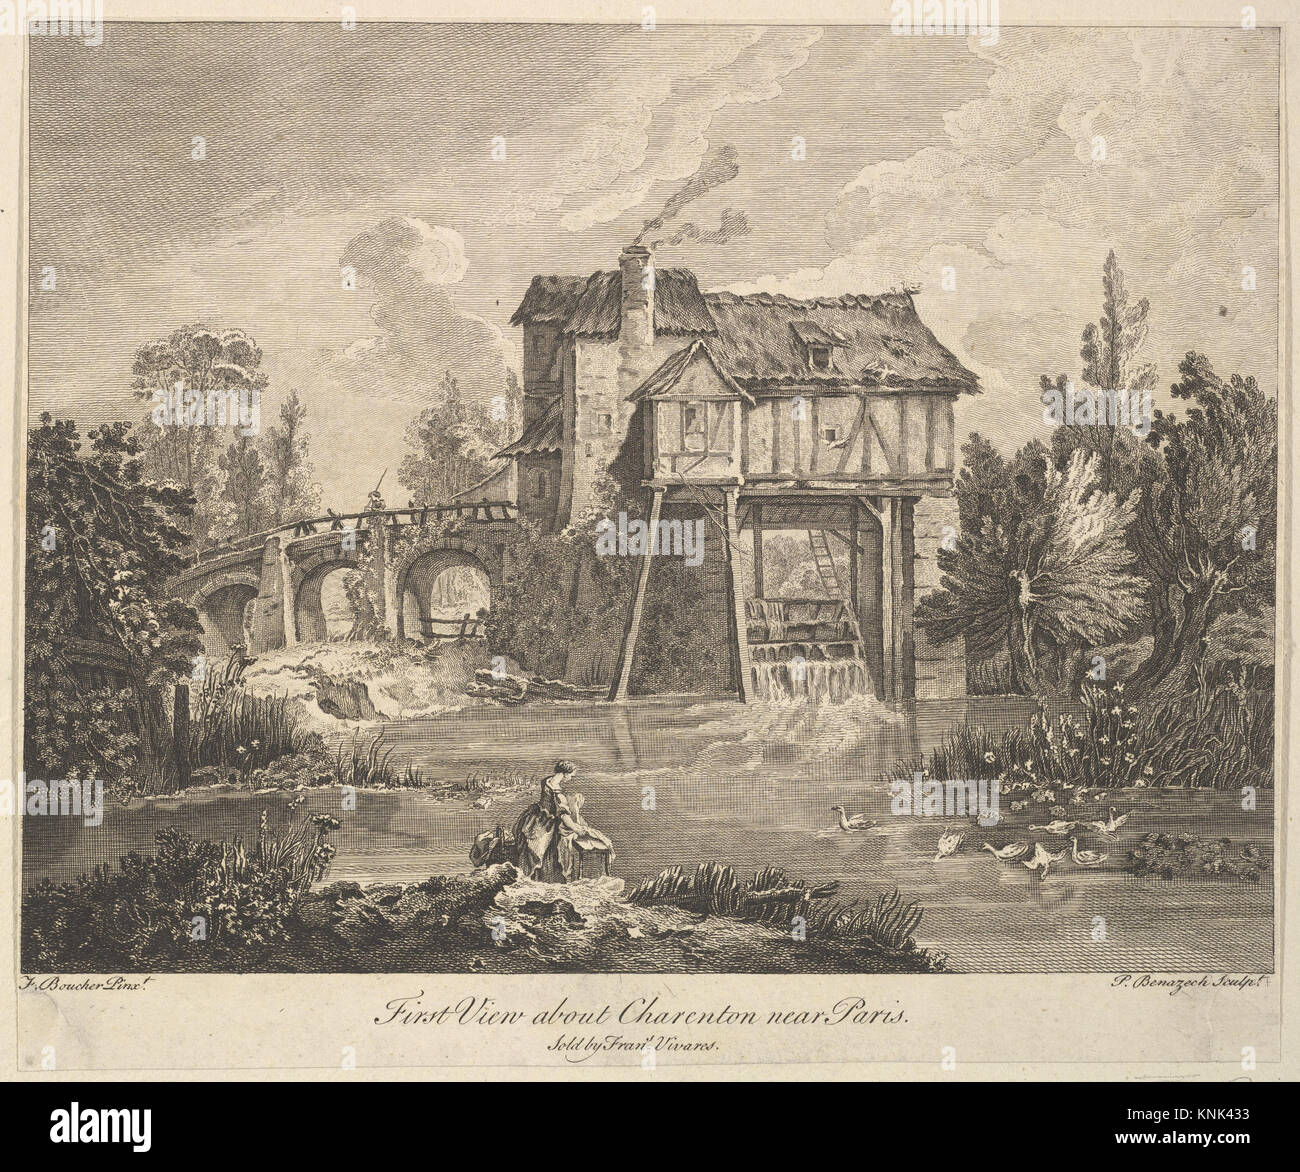 First View of Clarenton near Paris, print, Peter Paul Benazech (1730-1783), after François Boucher (1703-1770), mid to late 18th century Stock Photo